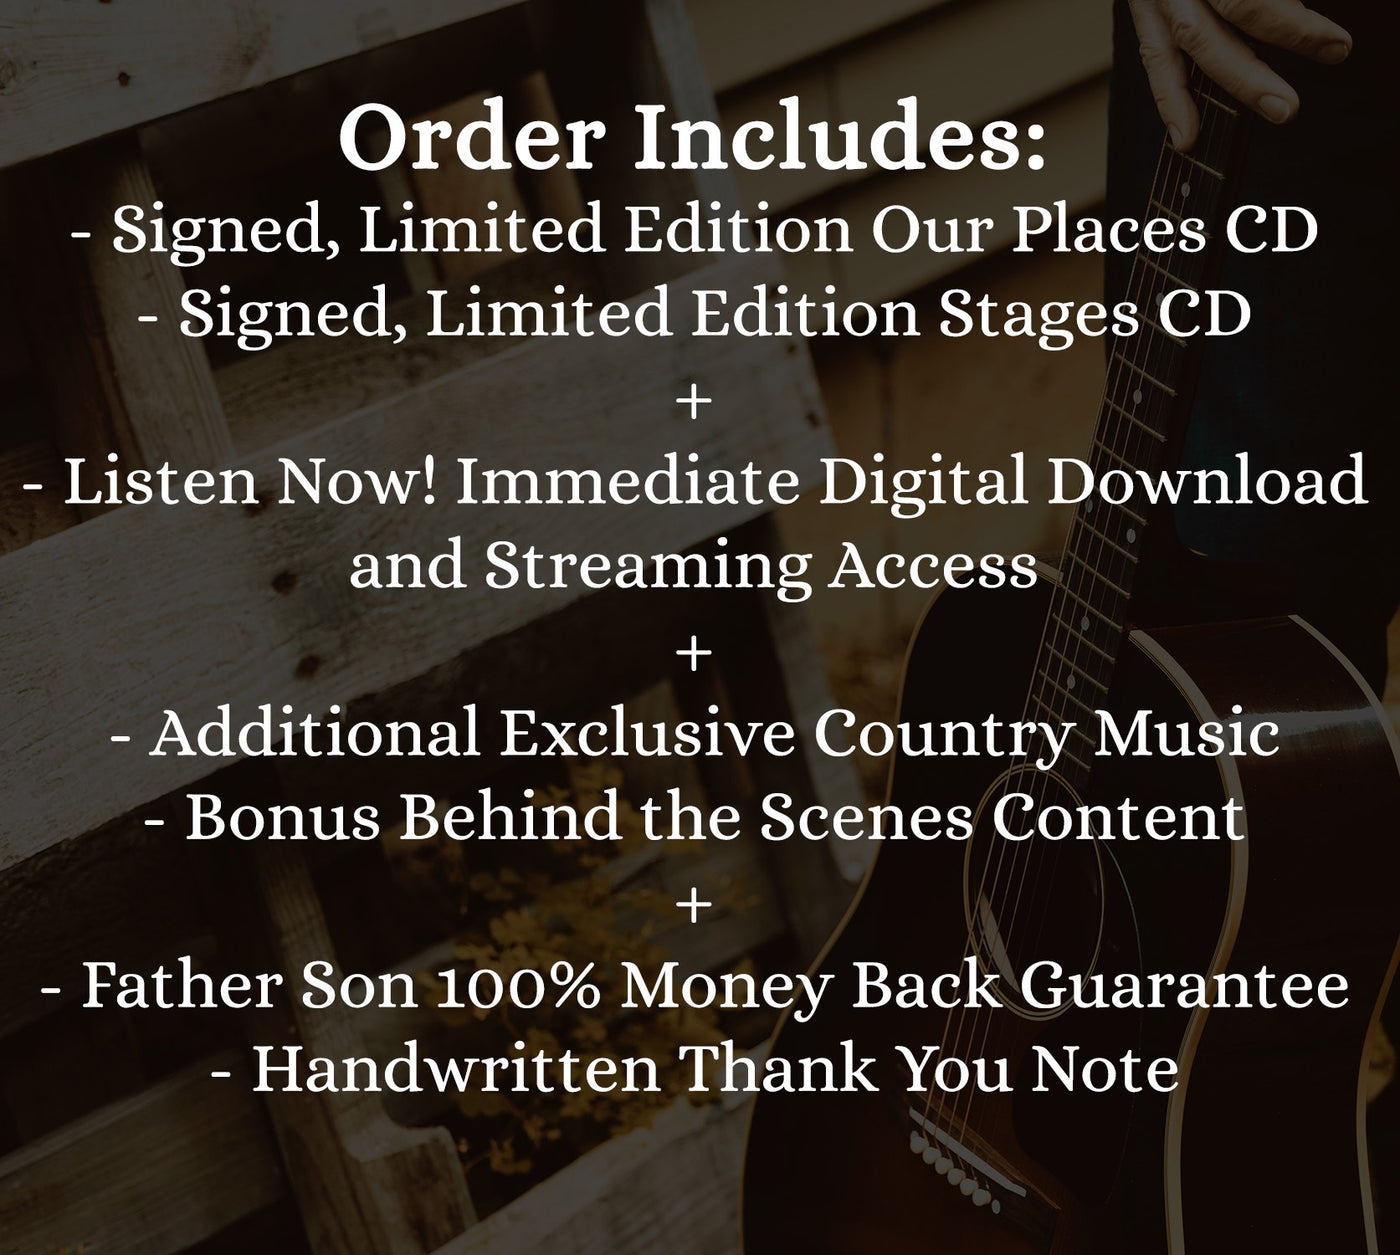 Our Places and Stages CD Bundle